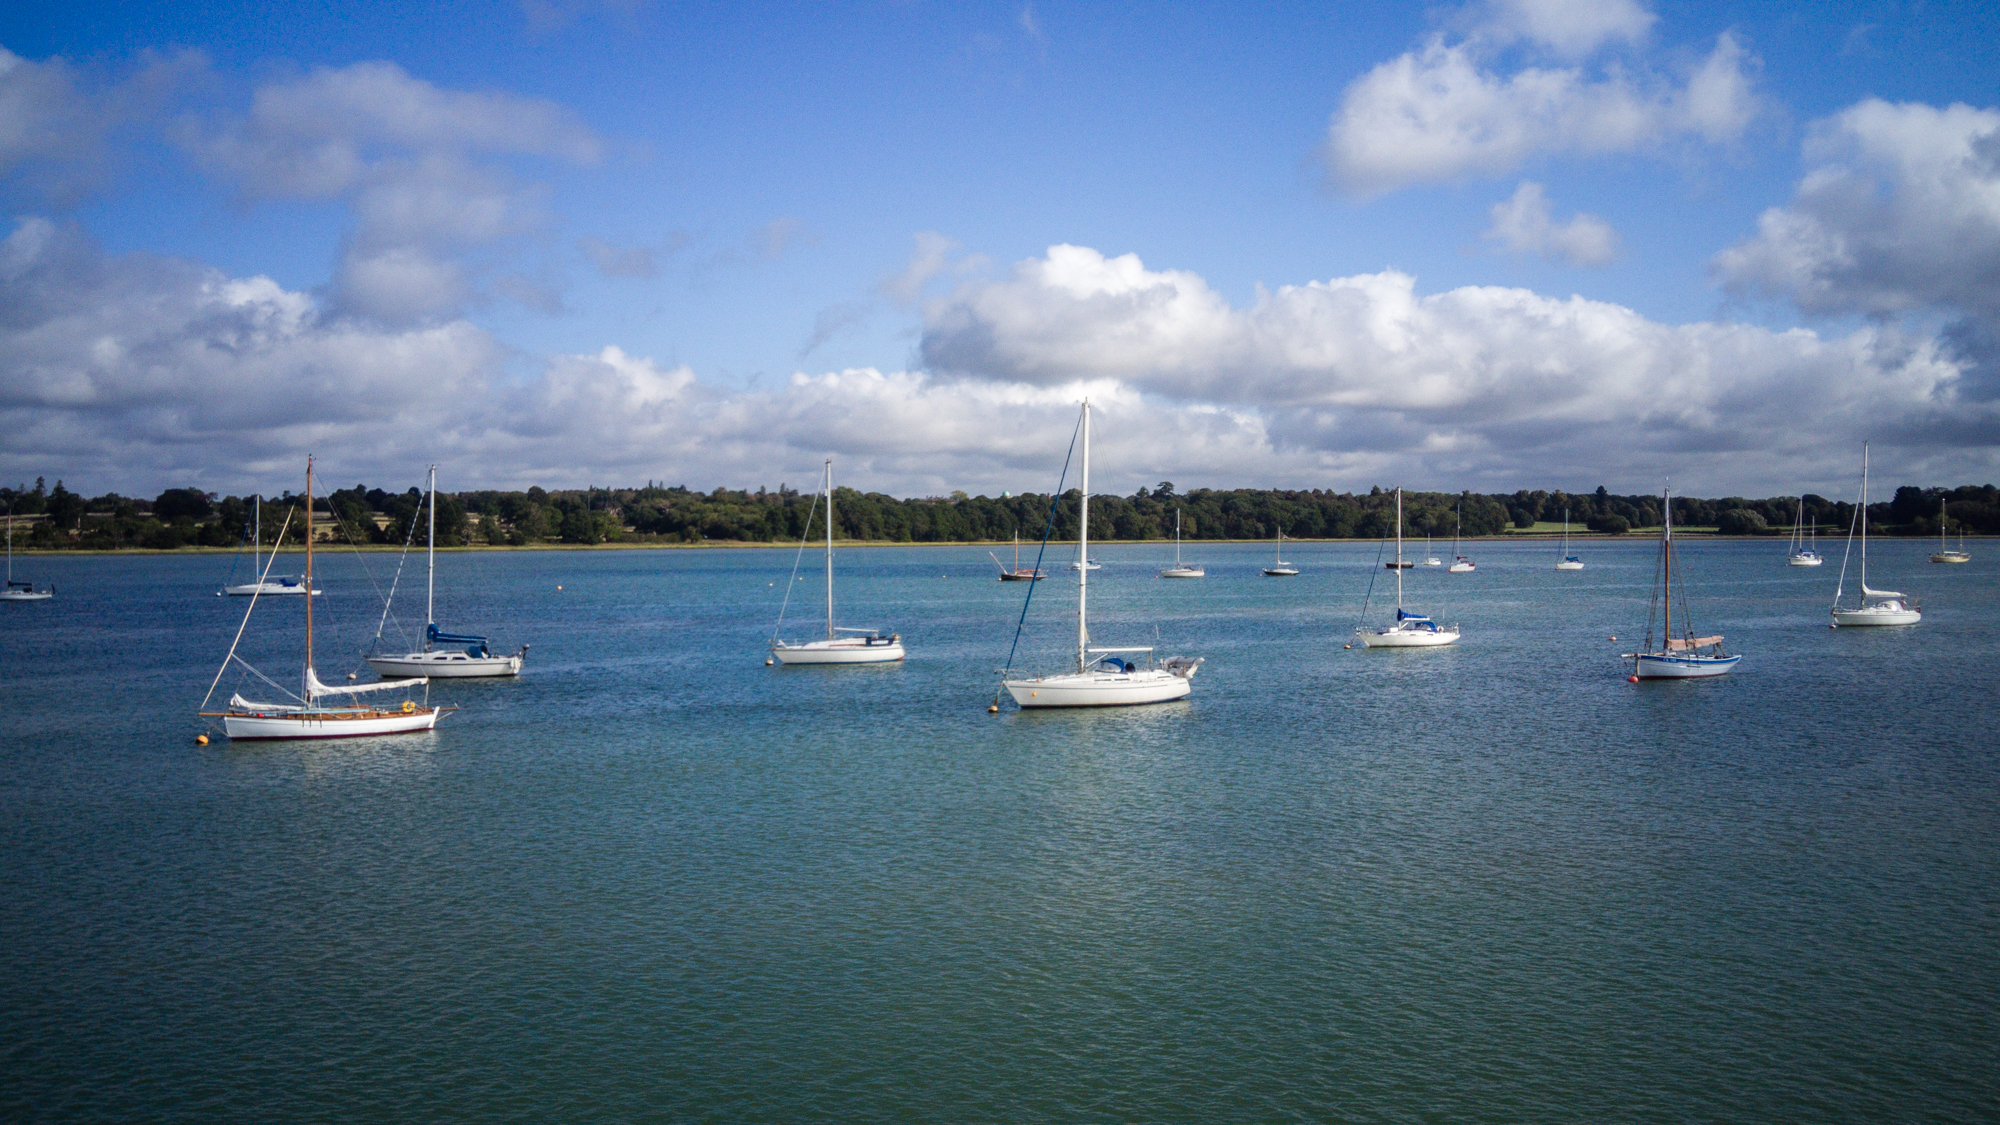 Photo of yachts taken with the Potensic Atom drone